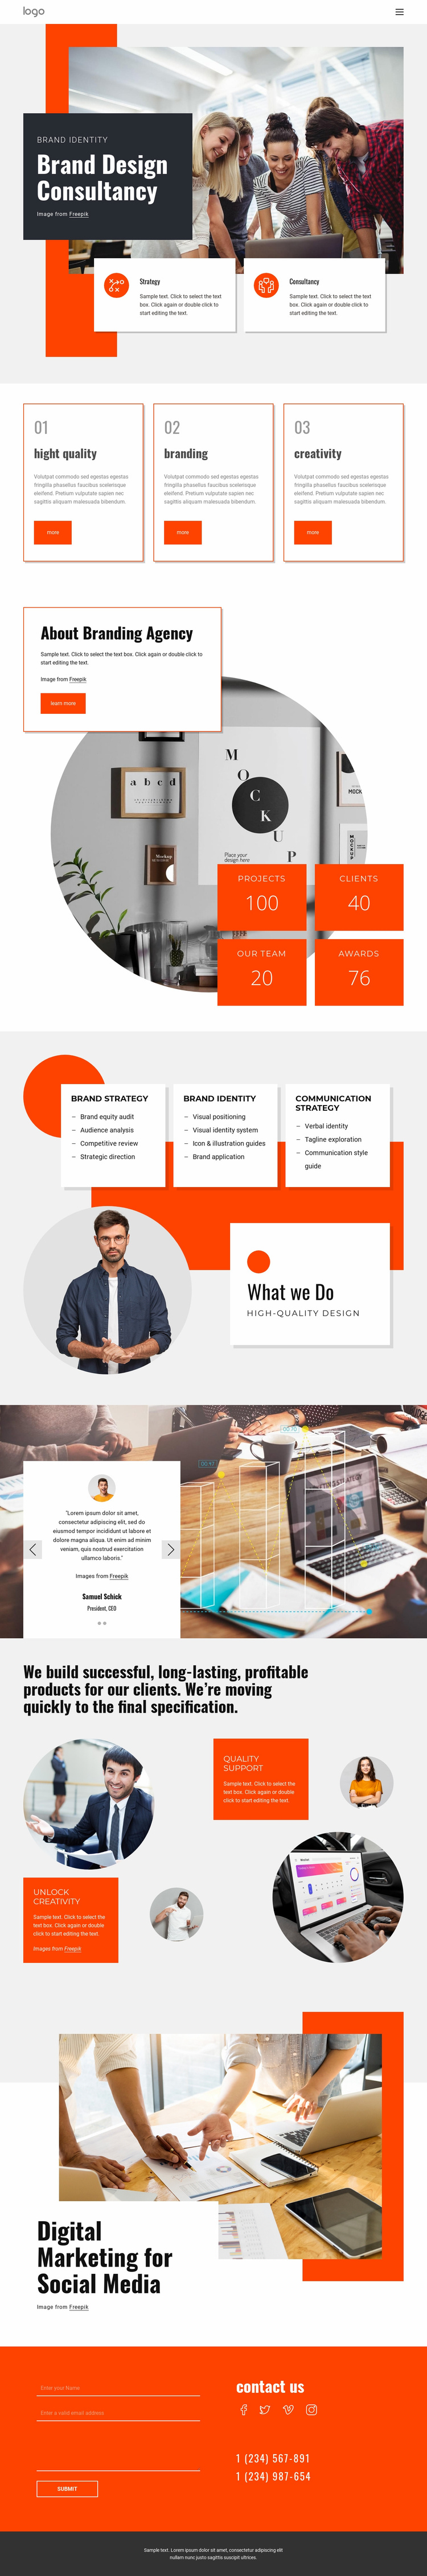 Growth design agency Landing Page